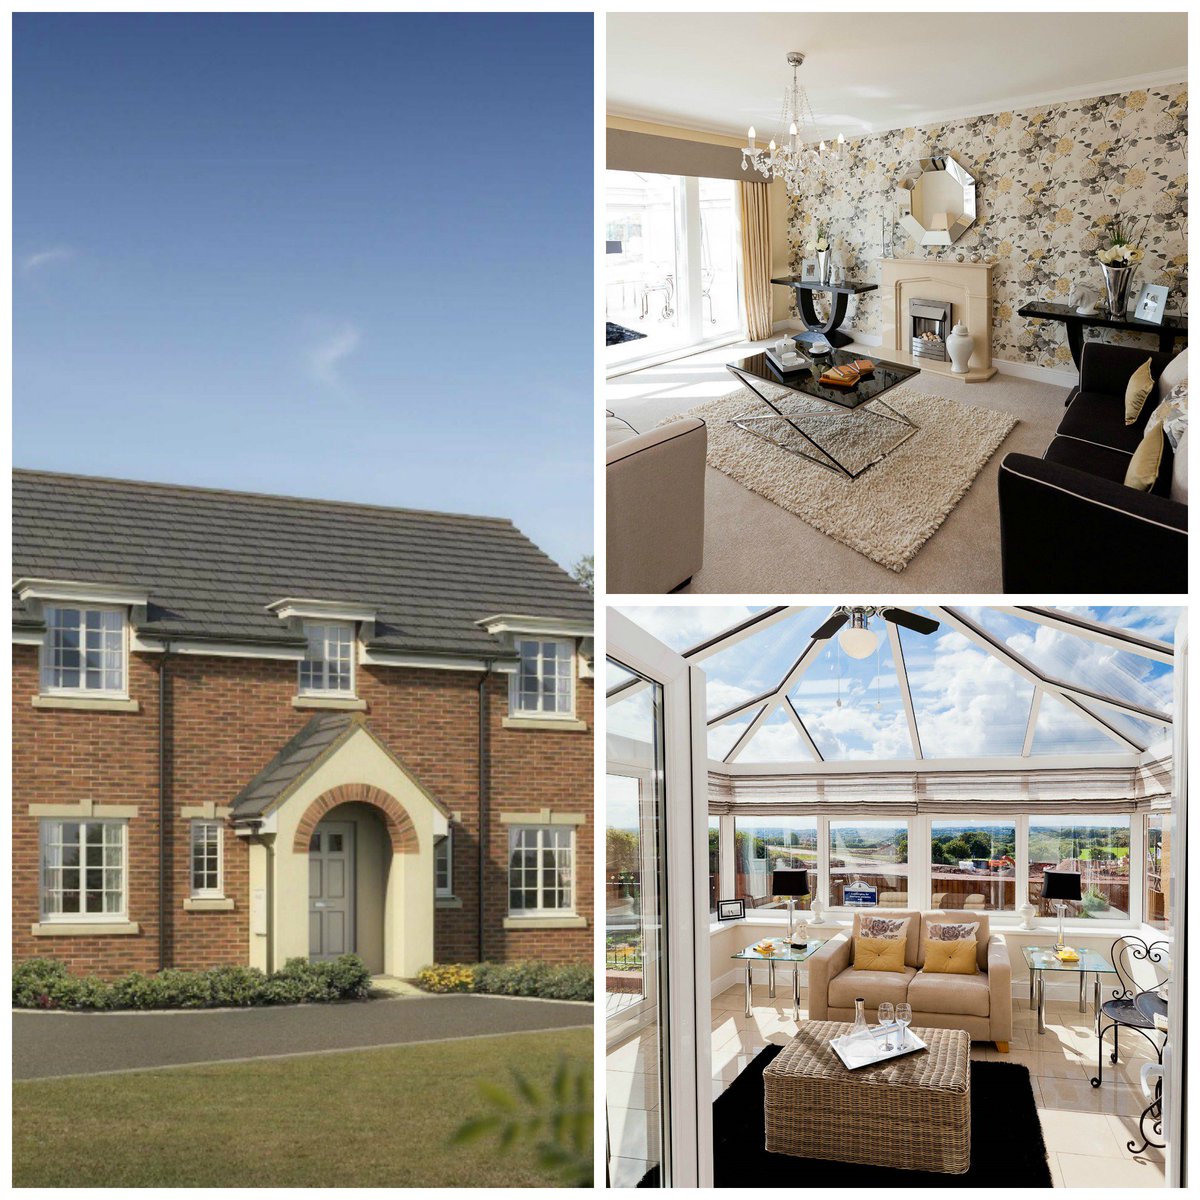 Picturesque homes in a charming village. Prices from £254,995 #SaintFagans bit.ly/22XqF0Z